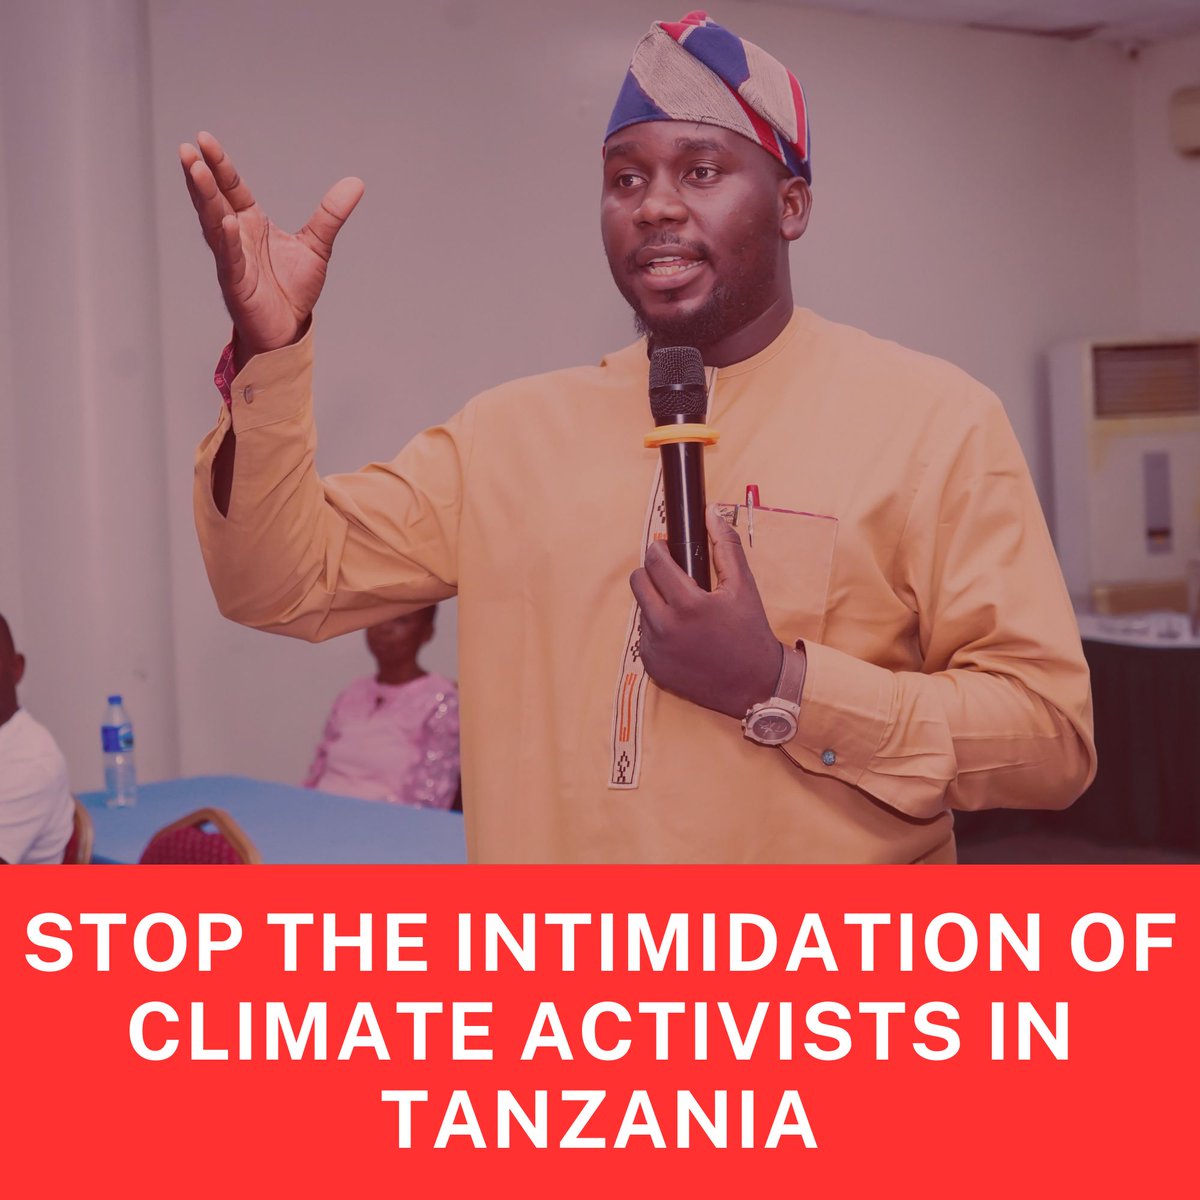 Stop the intimidation of climate activists in Tanzania.

They have the right to speak up and express their concerns regarding the EACOP

#Faiths4Climate #StopEACOP 
@GreenFaith_Afr @greenfaithworld